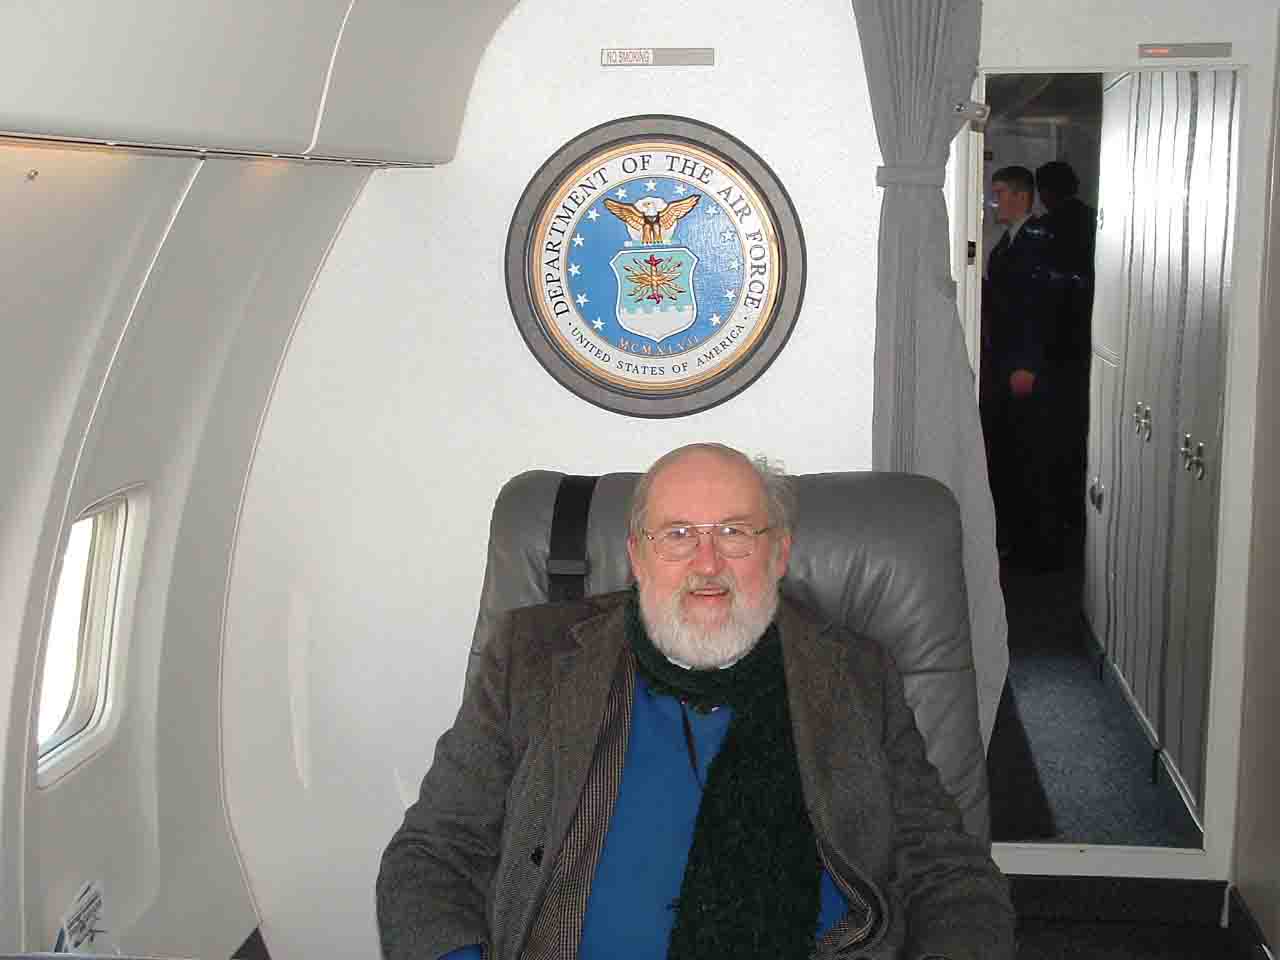 Craig B. Waff sitting in Air Force Two (in one of the several aircraft that conveys the U.S. Vice President) in December 2005 while he was detailed as historian to the 89th Airlift Wing at Andrews AFB.